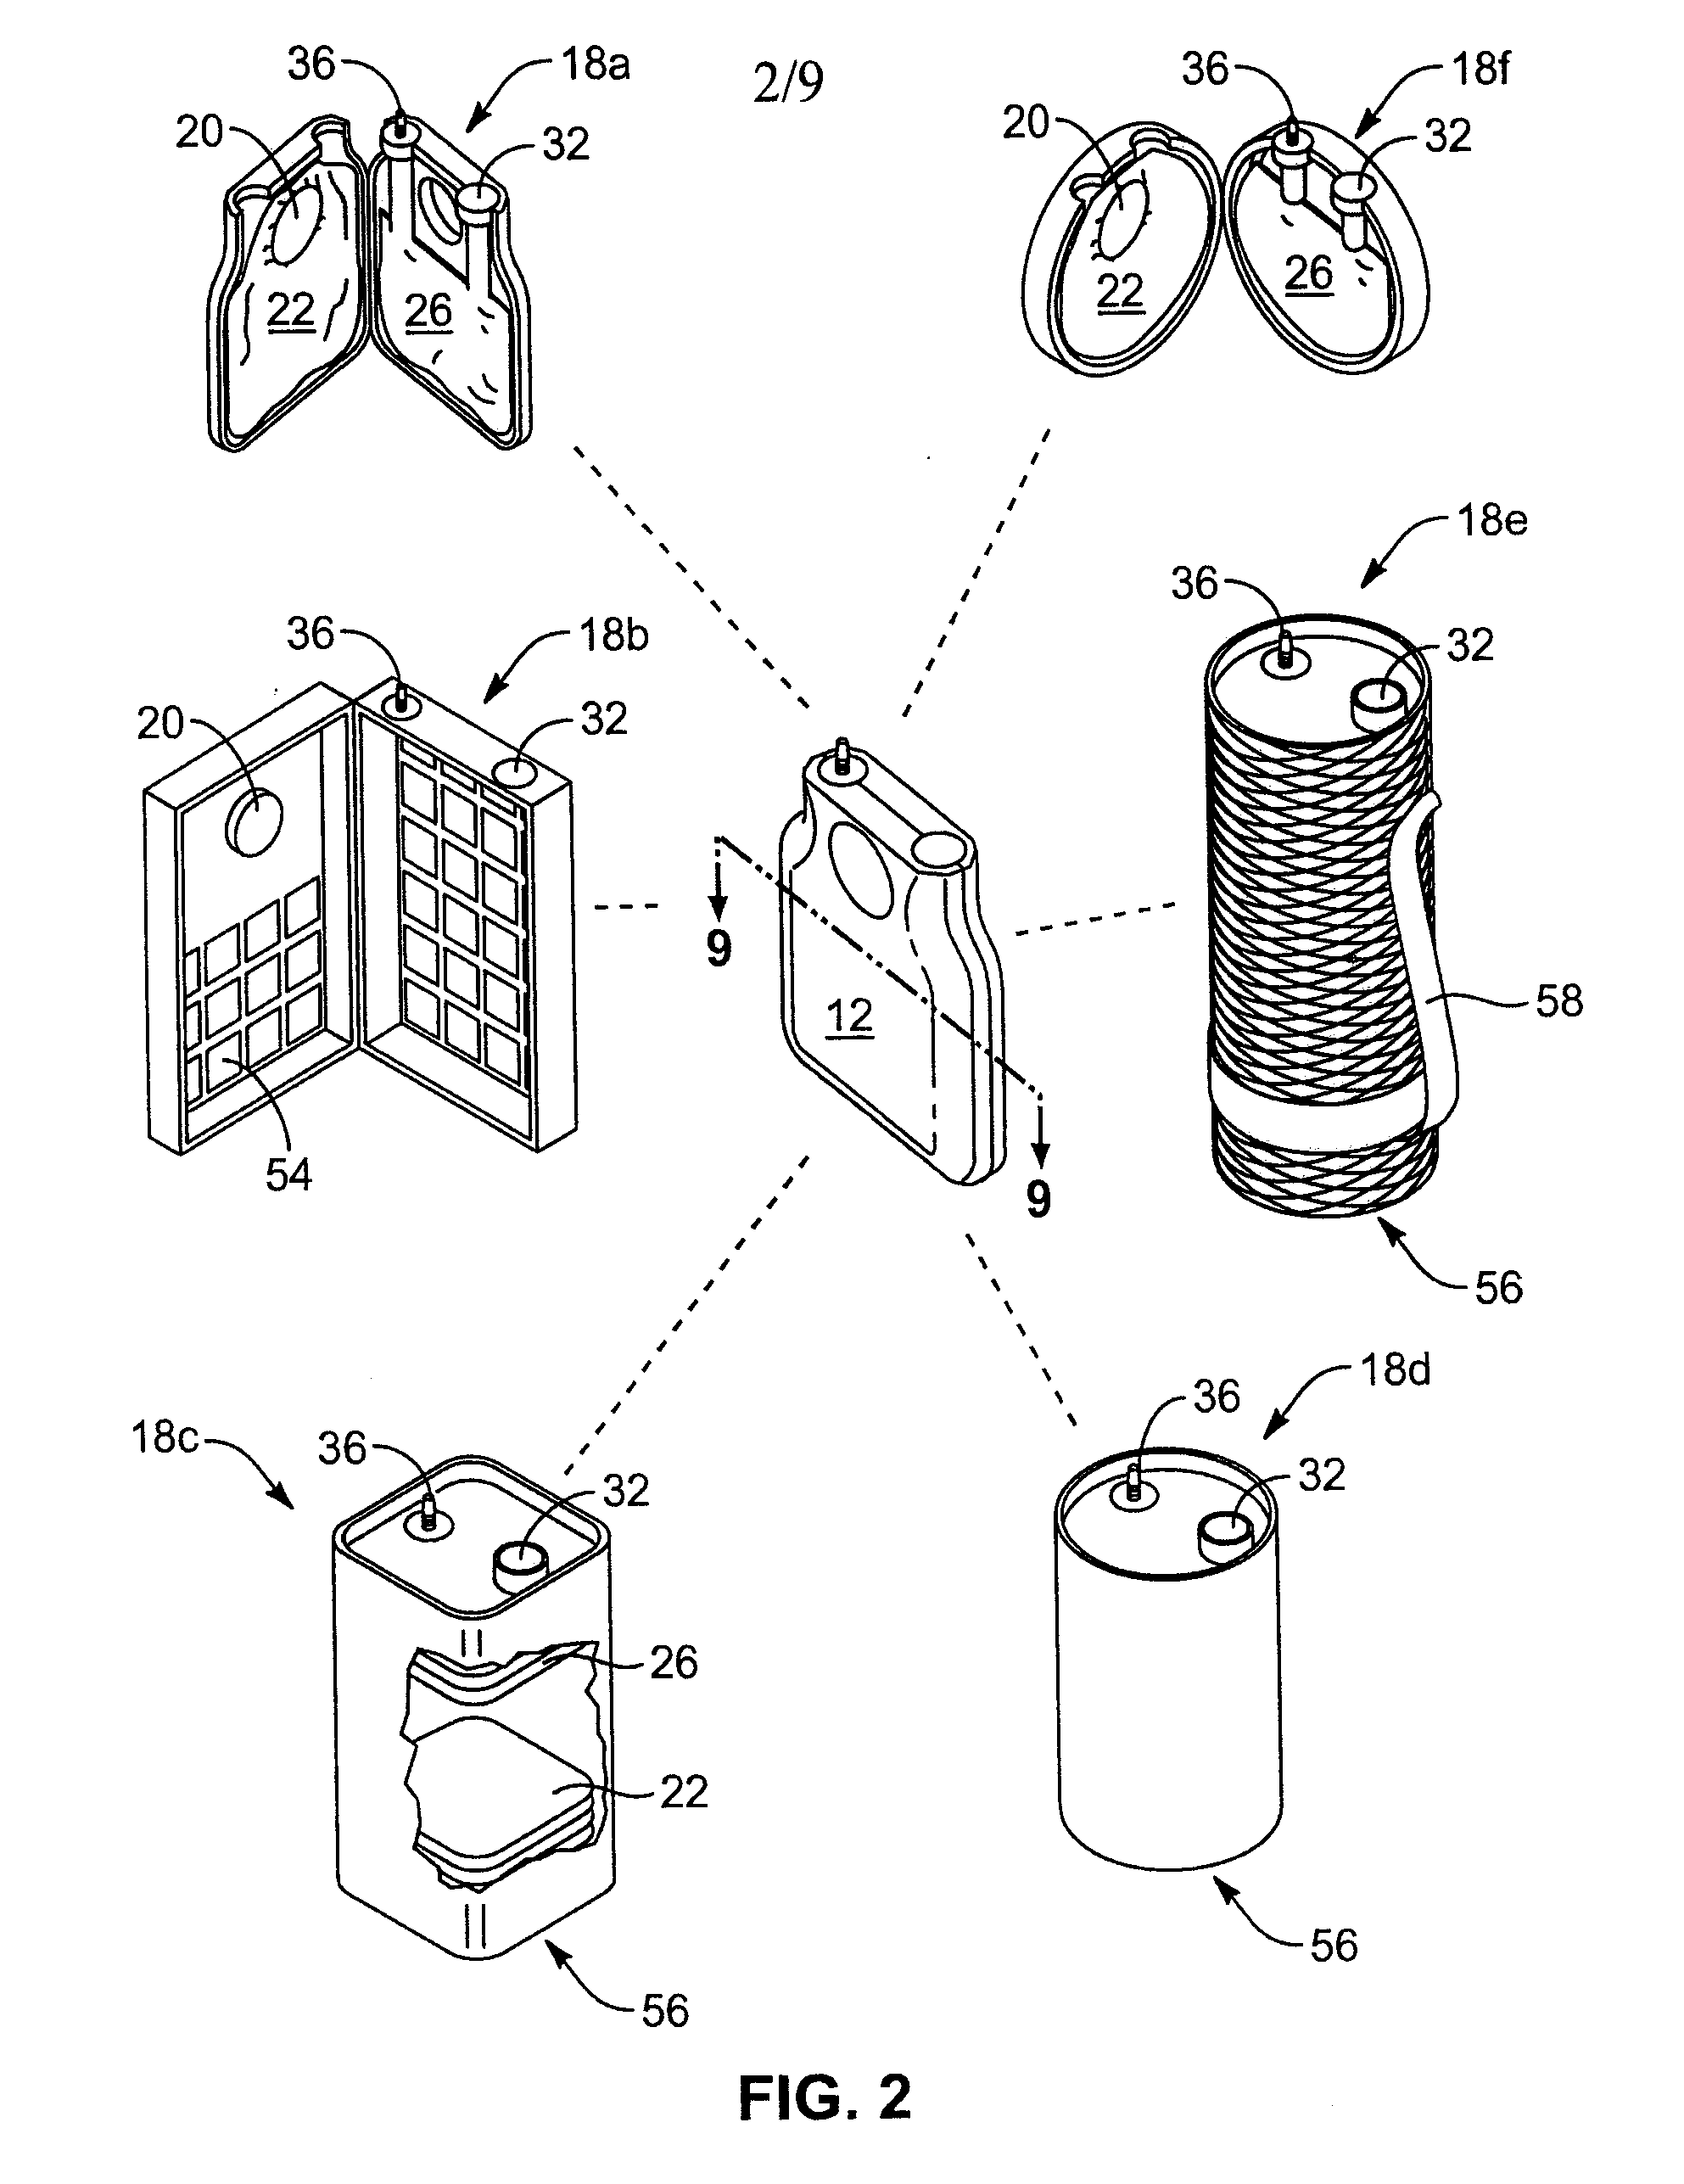 Auto-replenishing, wound-dressing apparatus and method